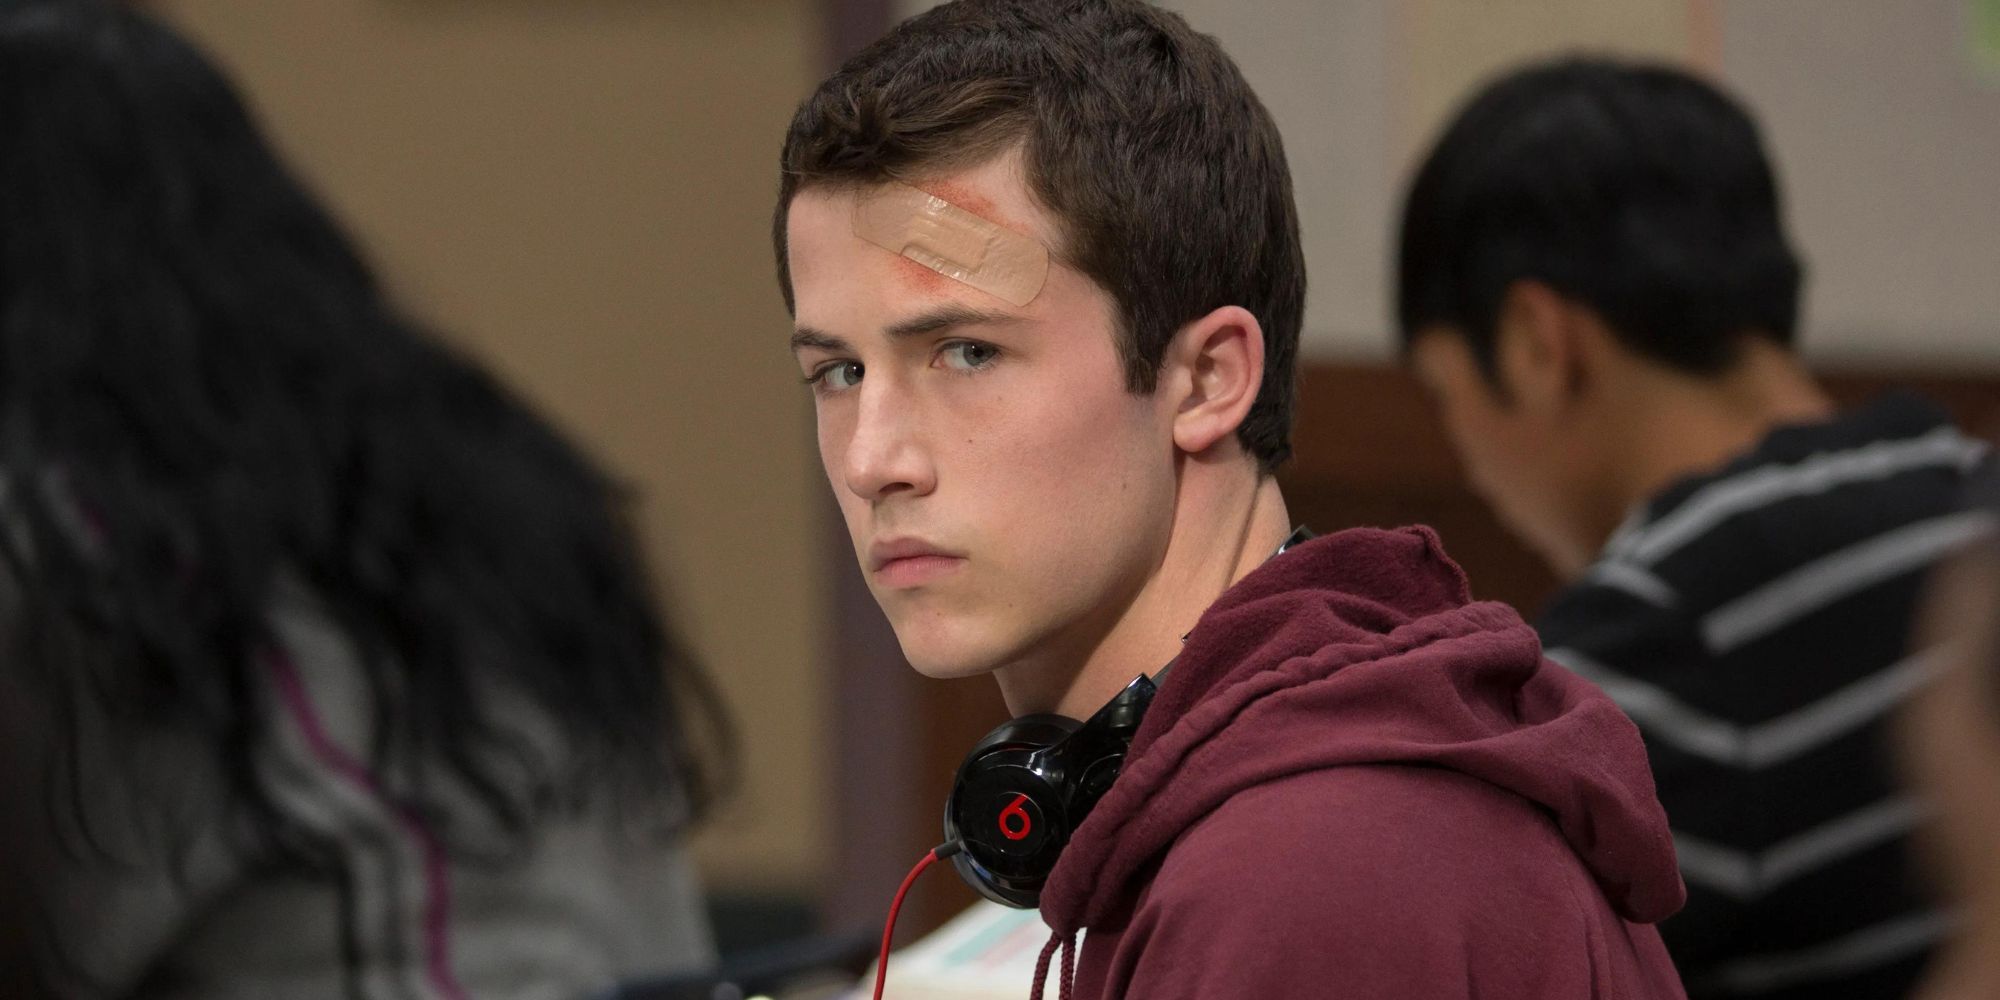 Clay Jensen from 13 Reasons Why sitting in class